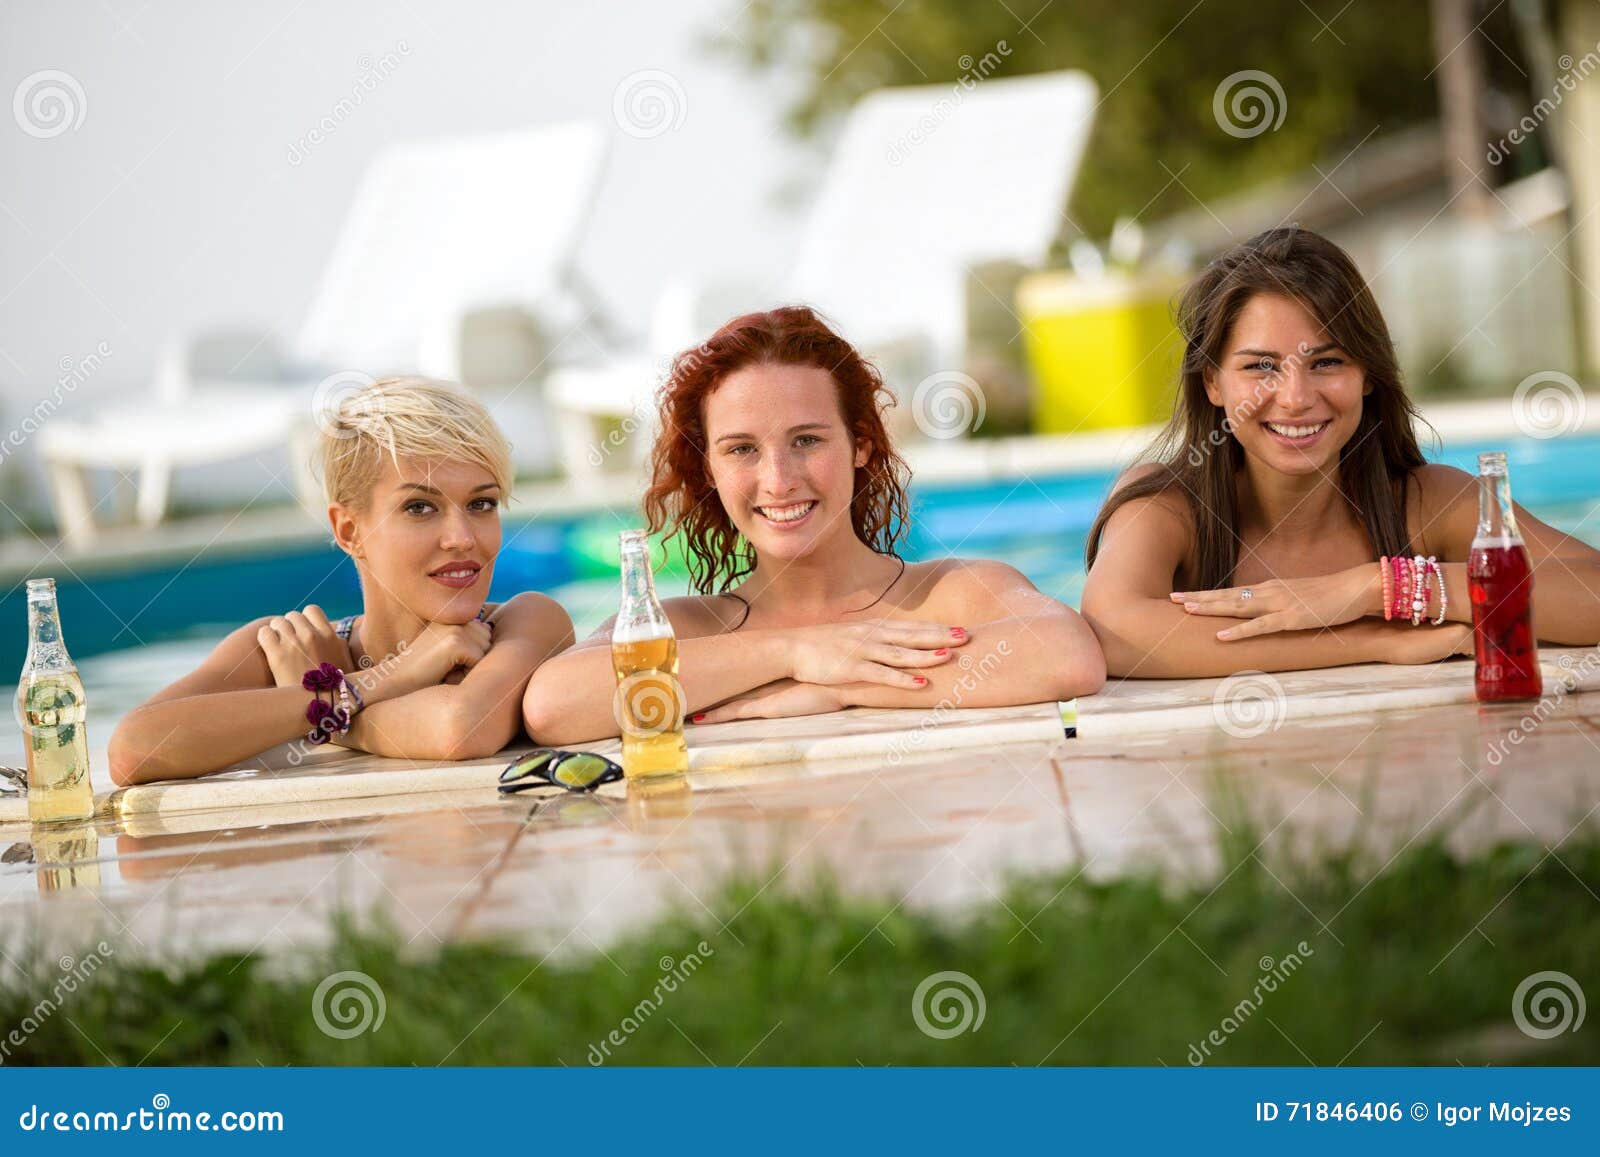 female bathers standing in front of railing of pool with bottles